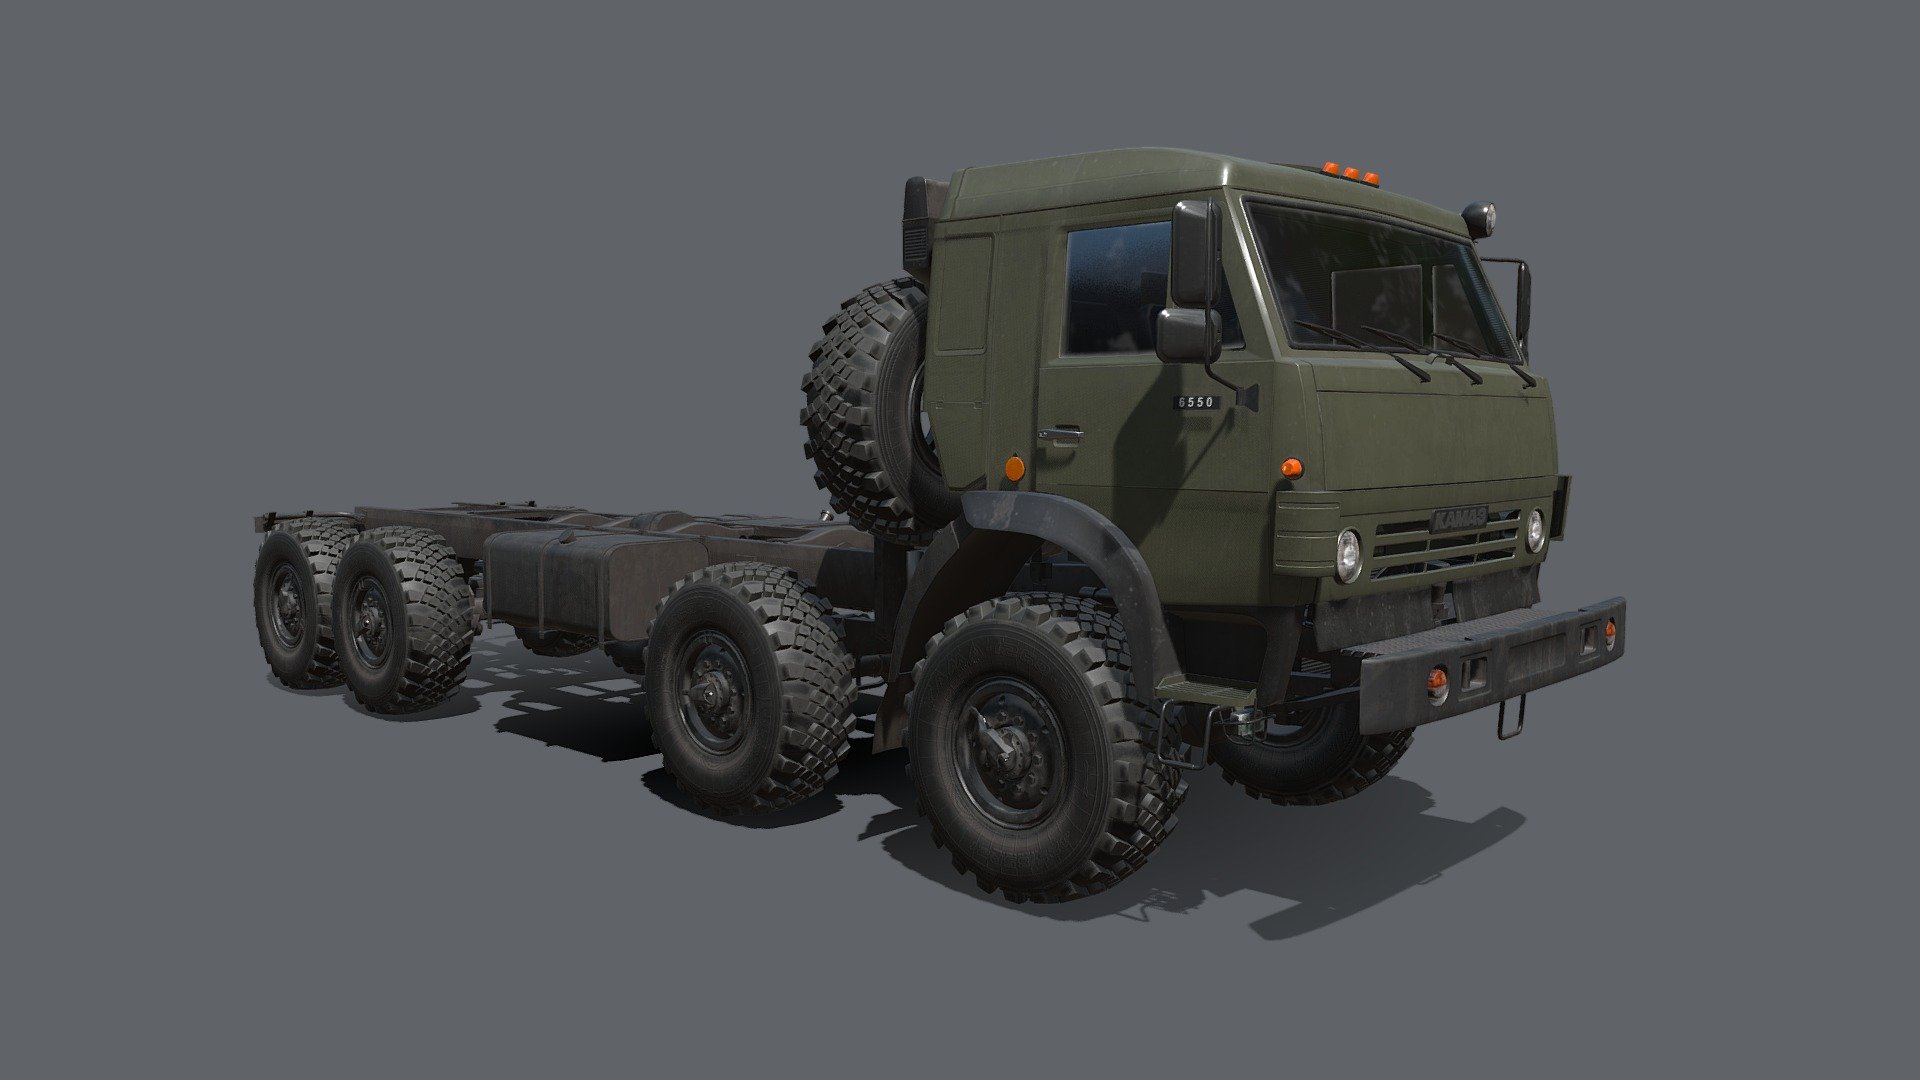 The KamAZ-6350 heavy utility truck is a member of Mustang family. This family of military trucks also includes smaller KamAZ-4350 (4x4) and KamAZ-5350. The 6350 model is one of the largest trucks in KamAZ range. Its development began in 1987. First prototypes were completed in the early 1990s, however this truck was officially accepted to service with the Russian Army only in 2002, as well as other trucks of the Mustang range. A low-rate production commenced in 2003.

The KamAZ-6305 is entirely conventional in design. It is a renewed version of the previous 8x8 heavy utility truck with increased payload capacity. This military truck has a payload capacity of 10. It can tow trailers or artillery pieces with a maximum weight of 12 000 kg - Kamaz-6350 Heavy utility truck - Buy Royalty Free 3D model by Tim Samedov (@citizensnip) 3d model